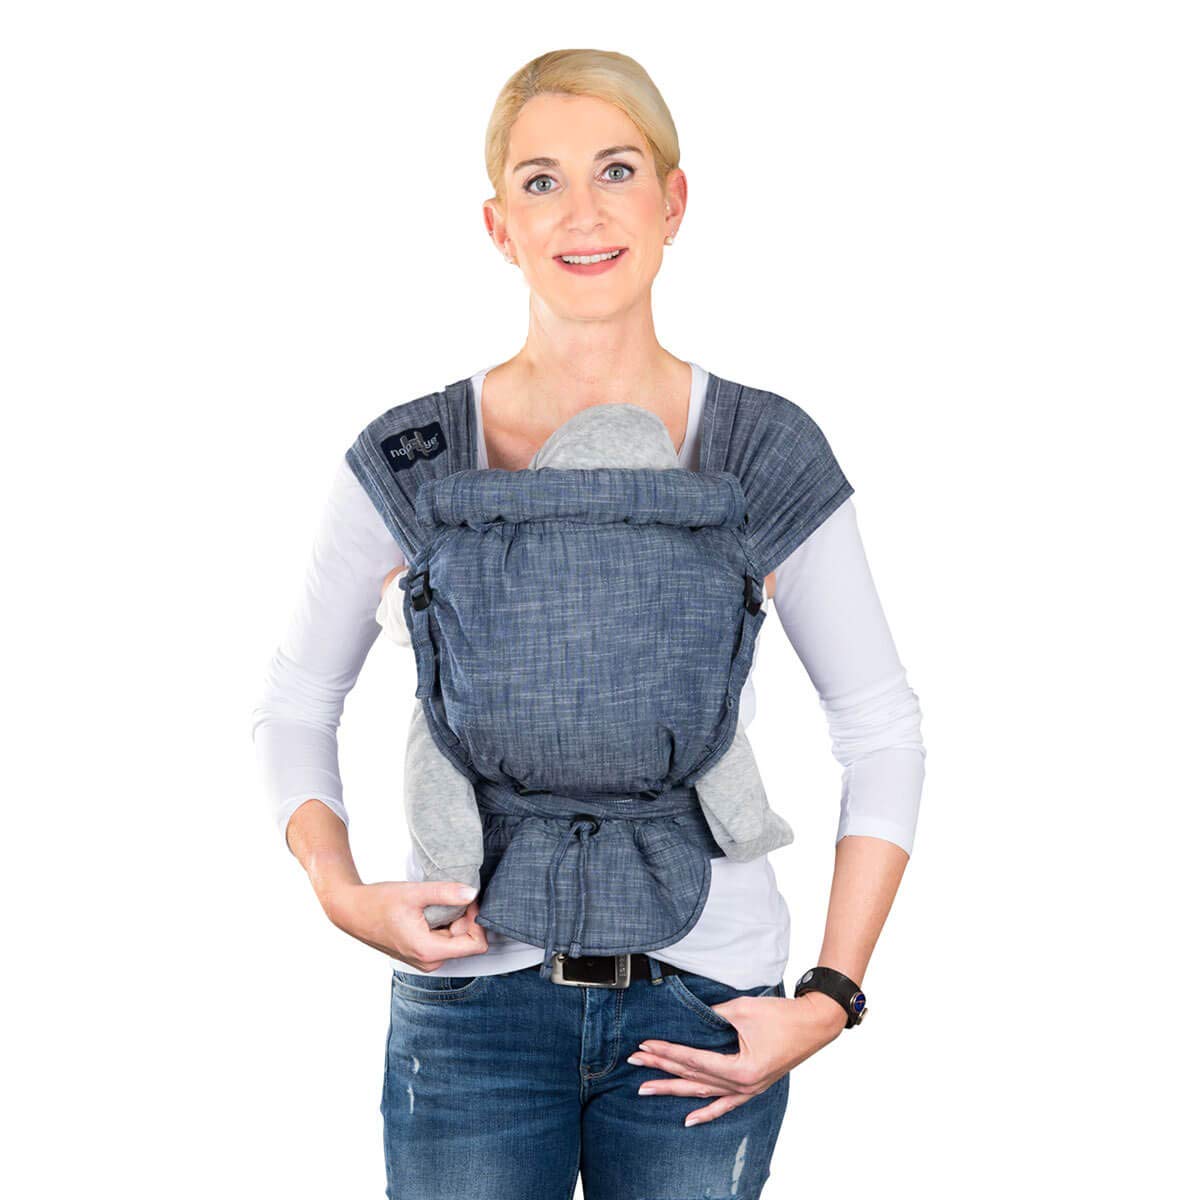 Hoppediz Hop-tye Buckle - Baby Carrier I Halfbuckle I Mei Tai I Belly Carrier & Back Carrier I Design Poplin Denim One Size Fits All Hip Circumference up to 160 cm